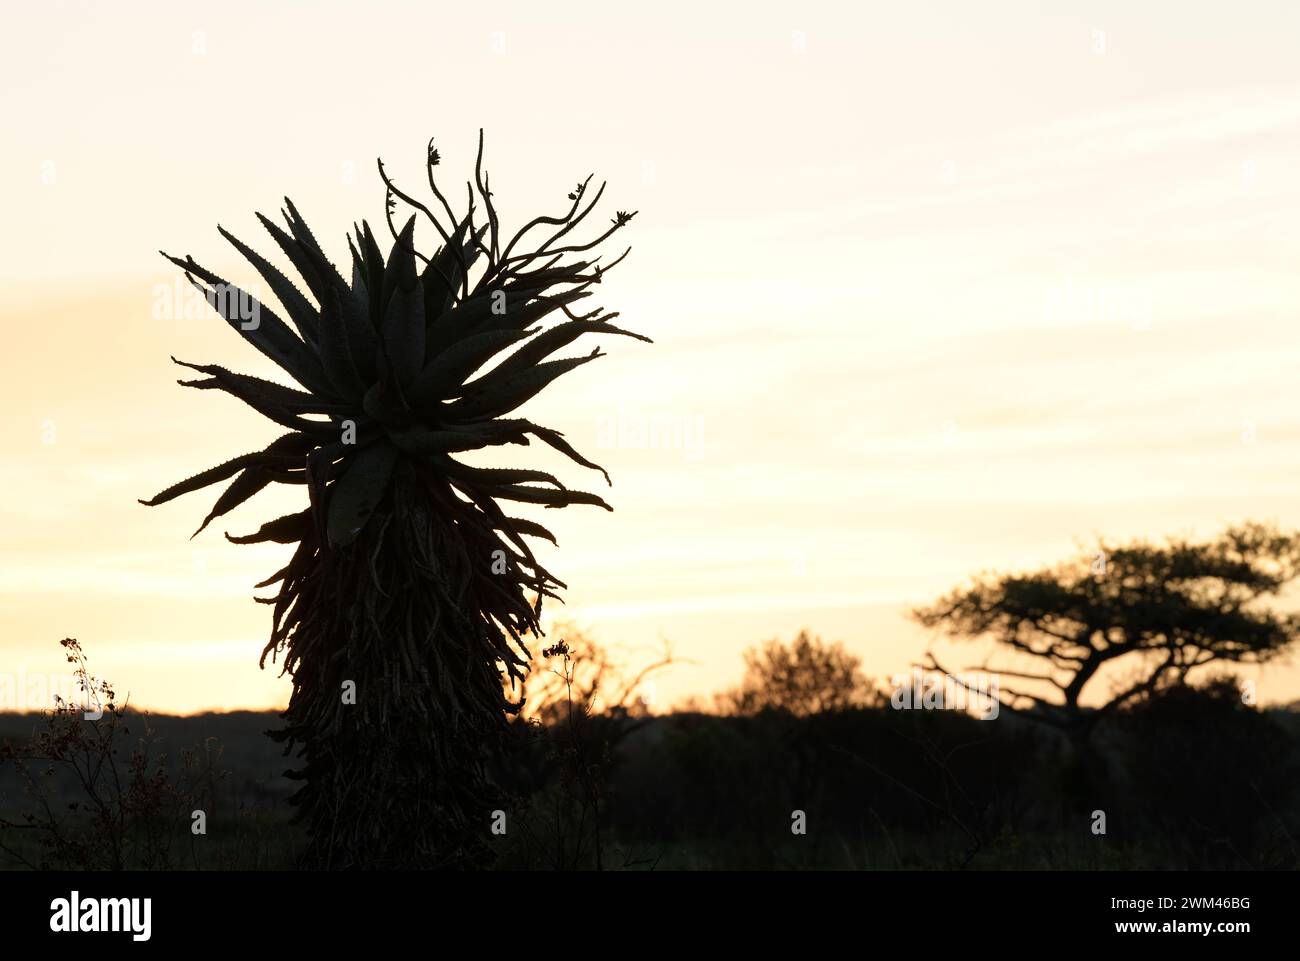 Beautiful Africa landscape, silhouette, succulent Aloe plant at sunset, beauty in nature, African travel destination, safari attraction Stock Photo